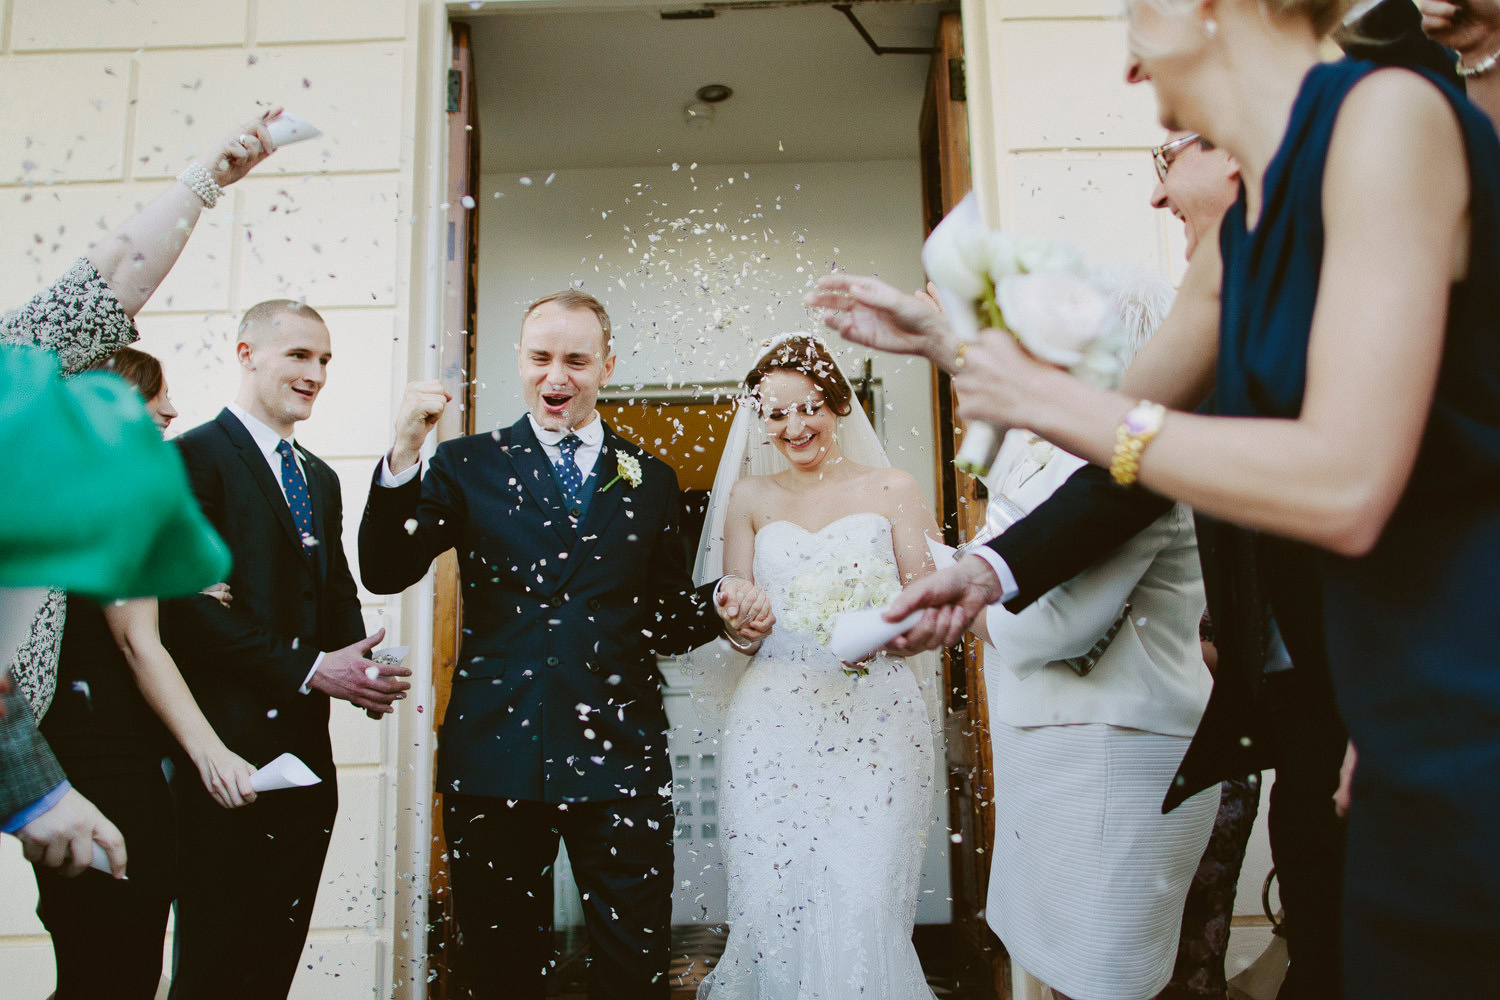 Bride and groom leave the ICA after their wedding while guests throw confetti